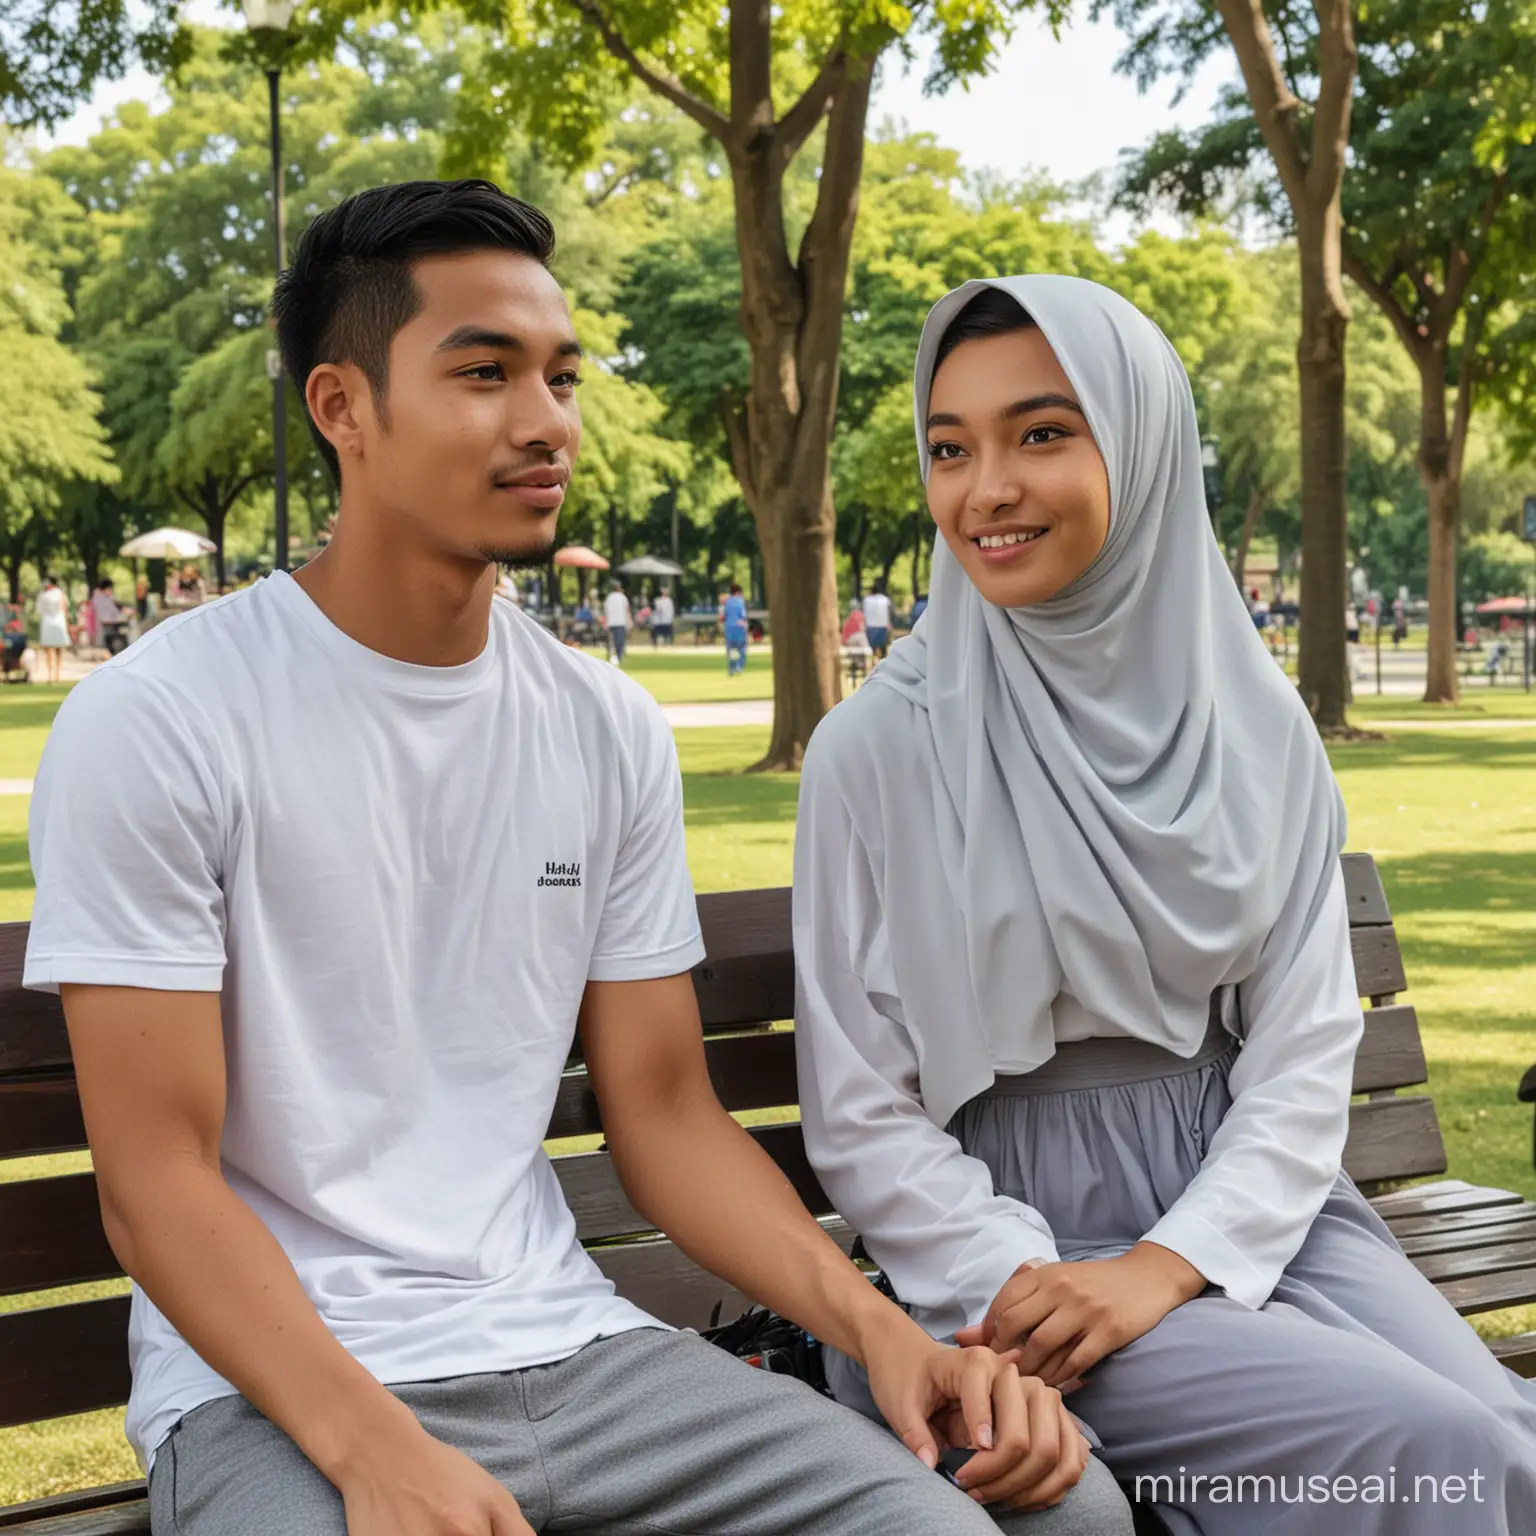 Indonesian Couple Relaxing in Park with HijabClad Woman